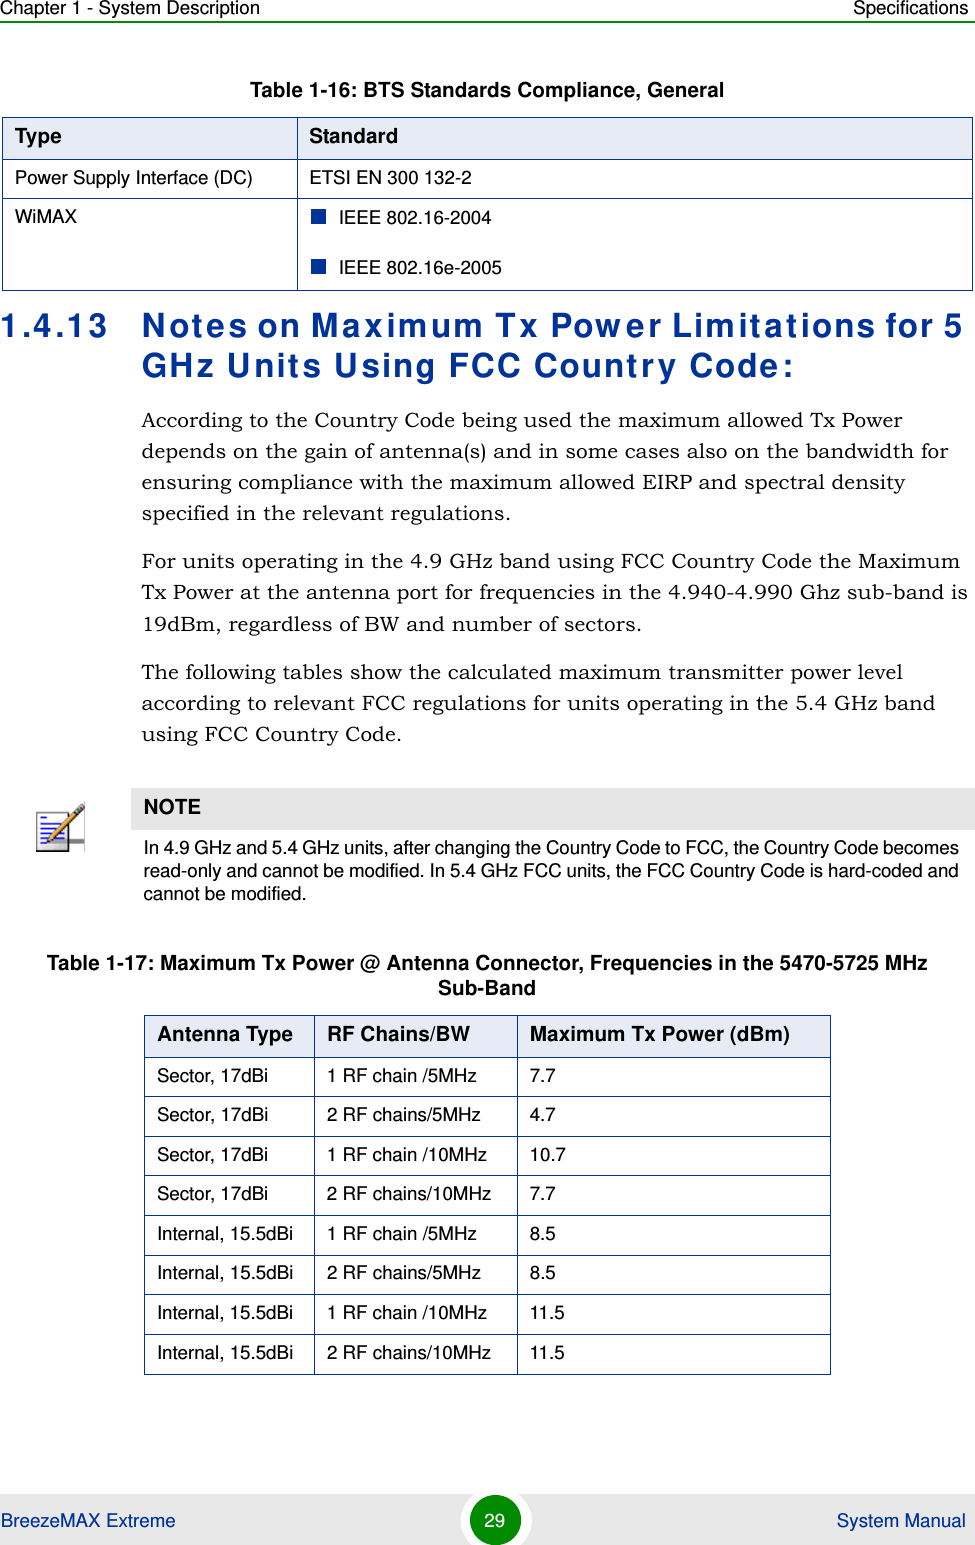 Chapter 1 - System Description SpecificationsBreezeMAX Extreme 29  System Manual1.4.13 Notes on Maximum Tx Power Limitations for 5 GHz Units Using FCC Country Code:According to the Country Code being used the maximum allowed Tx Power depends on the gain of antenna(s) and in some cases also on the bandwidth for ensuring compliance with the maximum allowed EIRP and spectral density specified in the relevant regulations.For units operating in the 4.9 GHz band using FCC Country Code the Maximum Tx Power at the antenna port for frequencies in the 4.940-4.990 Ghz sub-band is 19dBm, regardless of BW and number of sectors.The following tables show the calculated maximum transmitter power level according to relevant FCC regulations for units operating in the 5.4 GHz band using FCC Country Code. Power Supply Interface (DC) ETSI EN 300 132-2WiMAX IEEE 802.16-2004IEEE 802.16e-2005NOTEIn 4.9 GHz and 5.4 GHz units, after changing the Country Code to FCC, the Country Code becomes read-only and cannot be modified. In 5.4 GHz FCC units, the FCC Country Code is hard-coded and cannot be modified.Table 1-17: Maximum Tx Power @ Antenna Connector, Frequencies in the 5470-5725 MHz Sub-BandAntenna Type RF Chains/BW Maximum Tx Power (dBm)Sector, 17dBi 1 RF chain /5MHz 7.7Sector, 17dBi 2 RF chains/5MHz 4.7Sector, 17dBi 1 RF chain /10MHz 10.7Sector, 17dBi 2 RF chains/10MHz 7.7Internal, 15.5dBi 1 RF chain /5MHz 8.5Internal, 15.5dBi 2 RF chains/5MHz 8.5Internal, 15.5dBi 1 RF chain /10MHz 11.5Internal, 15.5dBi 2 RF chains/10MHz 11.5Table 1-16: BTS Standards Compliance, GeneralType Standard